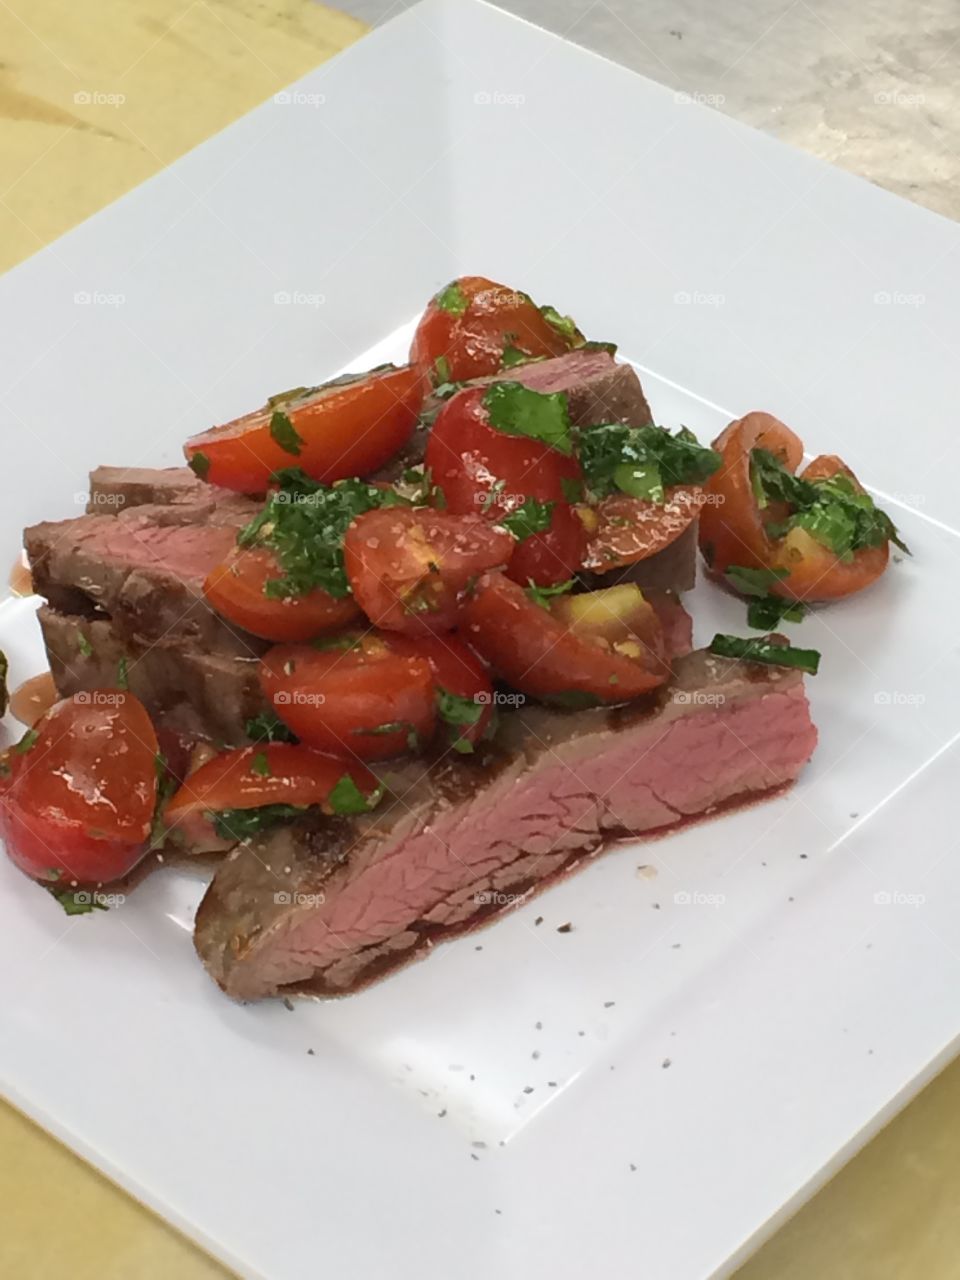 Steak,tomatoes,yummy,delicious,dinner